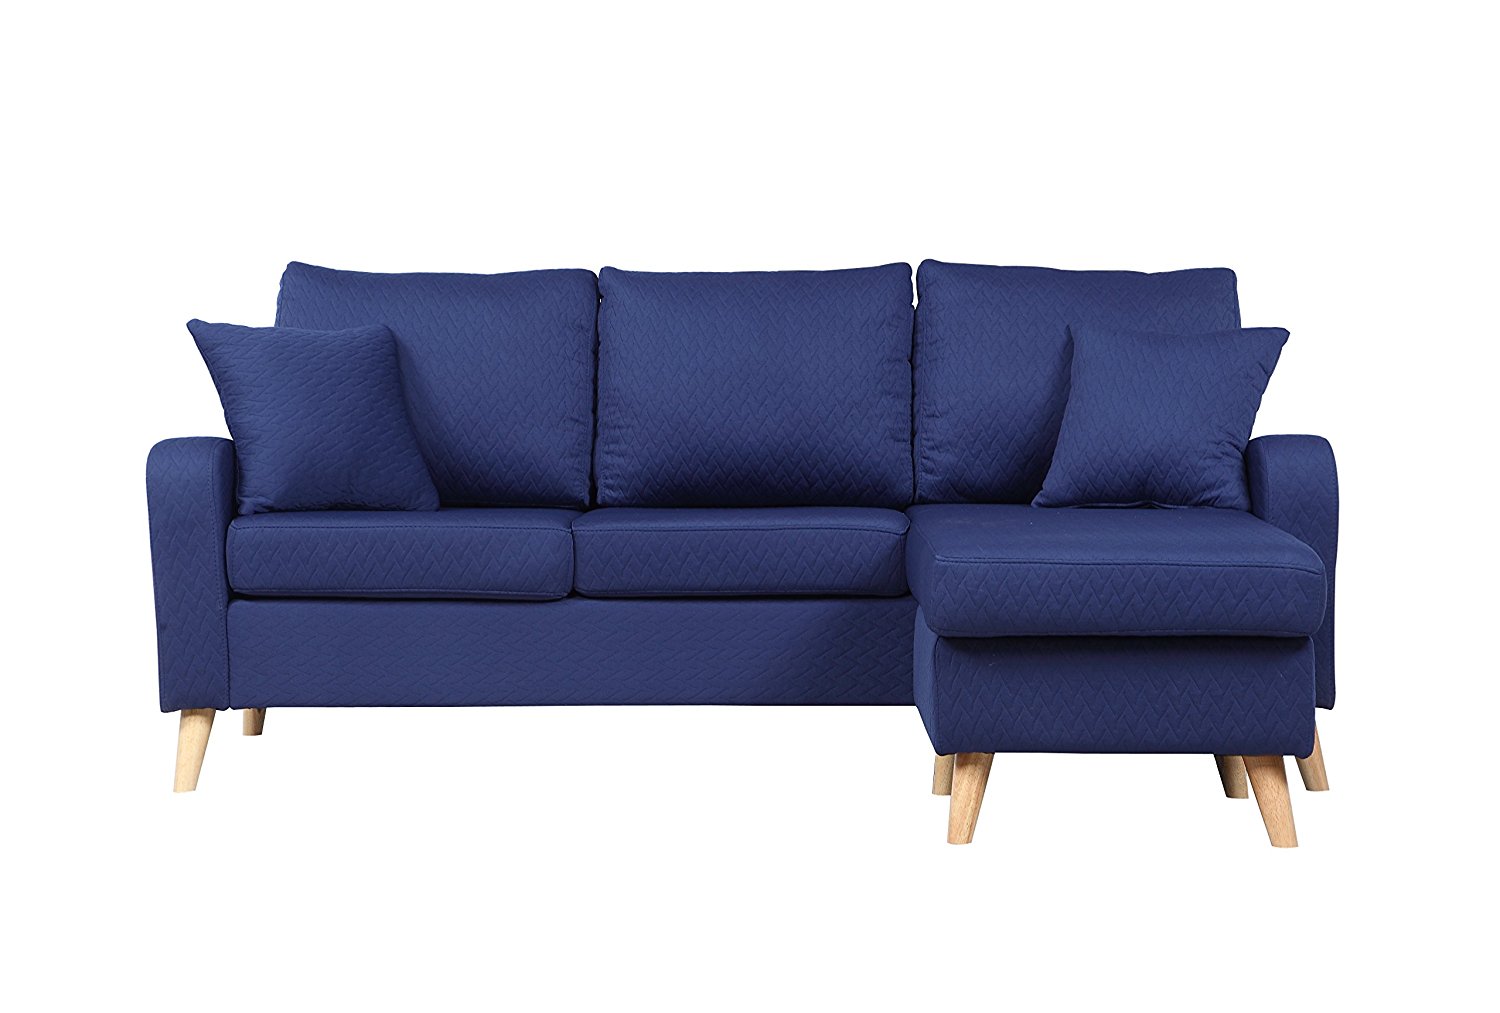 Mid Century Modern Linen Fabric Small Space Sectional Sofa with Reversible Chaise (Dark Blue)